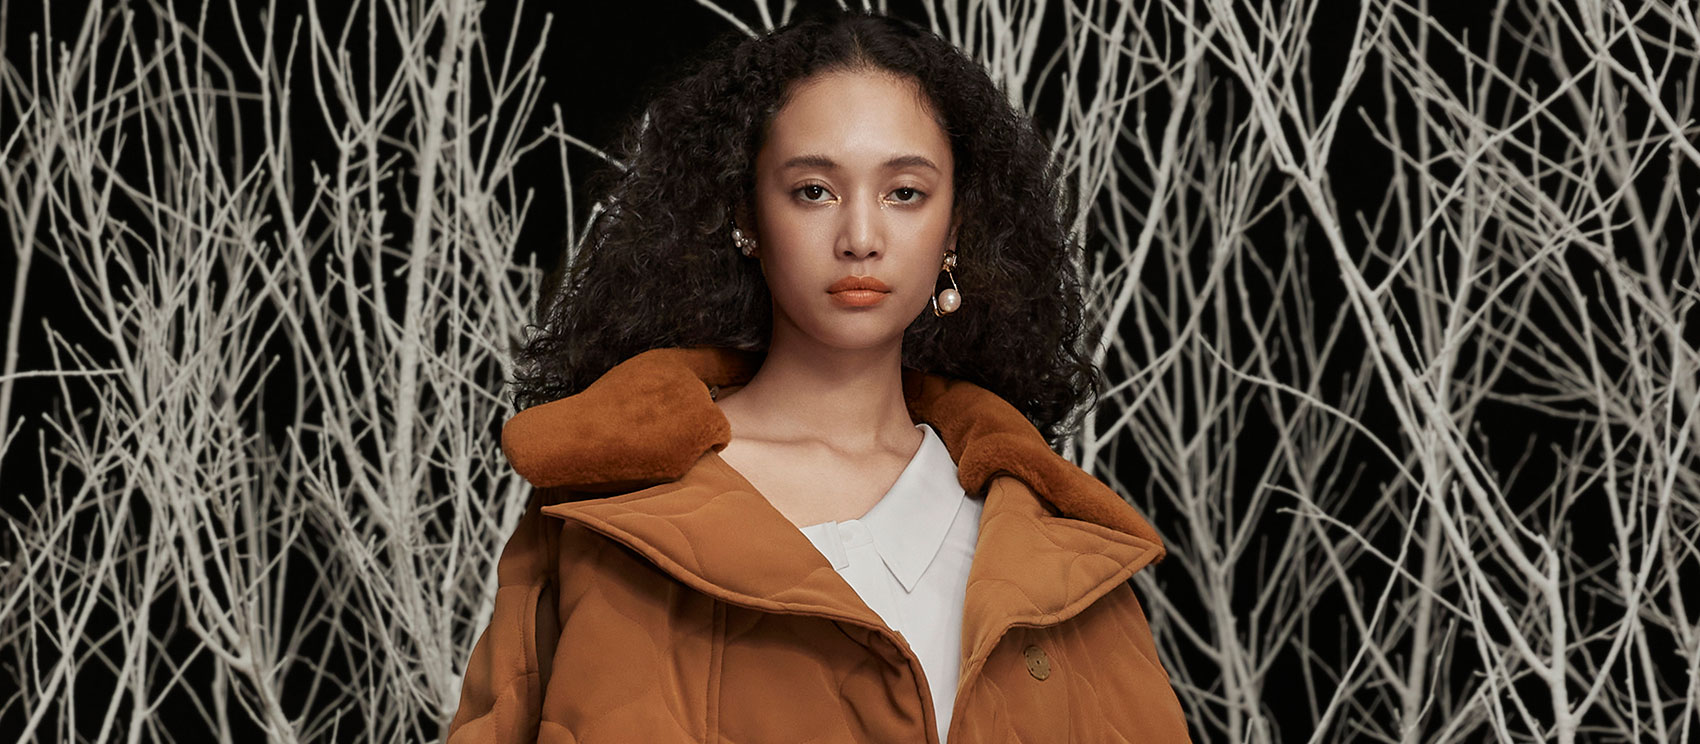 Adeam Fall Winter 2022 Collection | The Fashionography